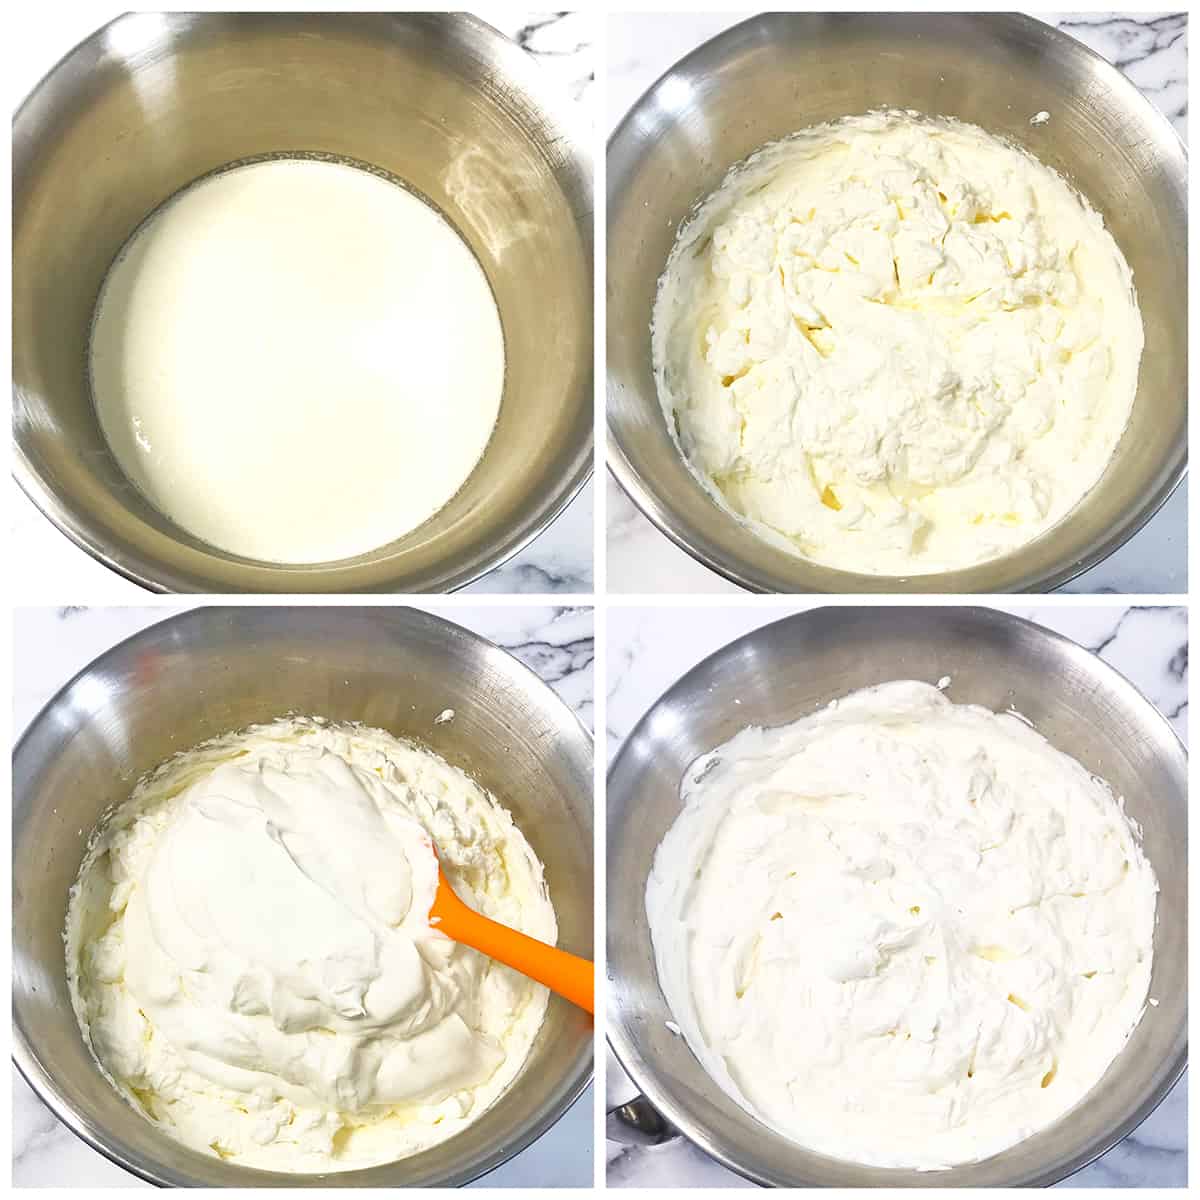 Let's start by making the delicious cream filling. Start by pouring heavy whipping cream into a large bowl and beat it at medium-high speed until it just thickens.